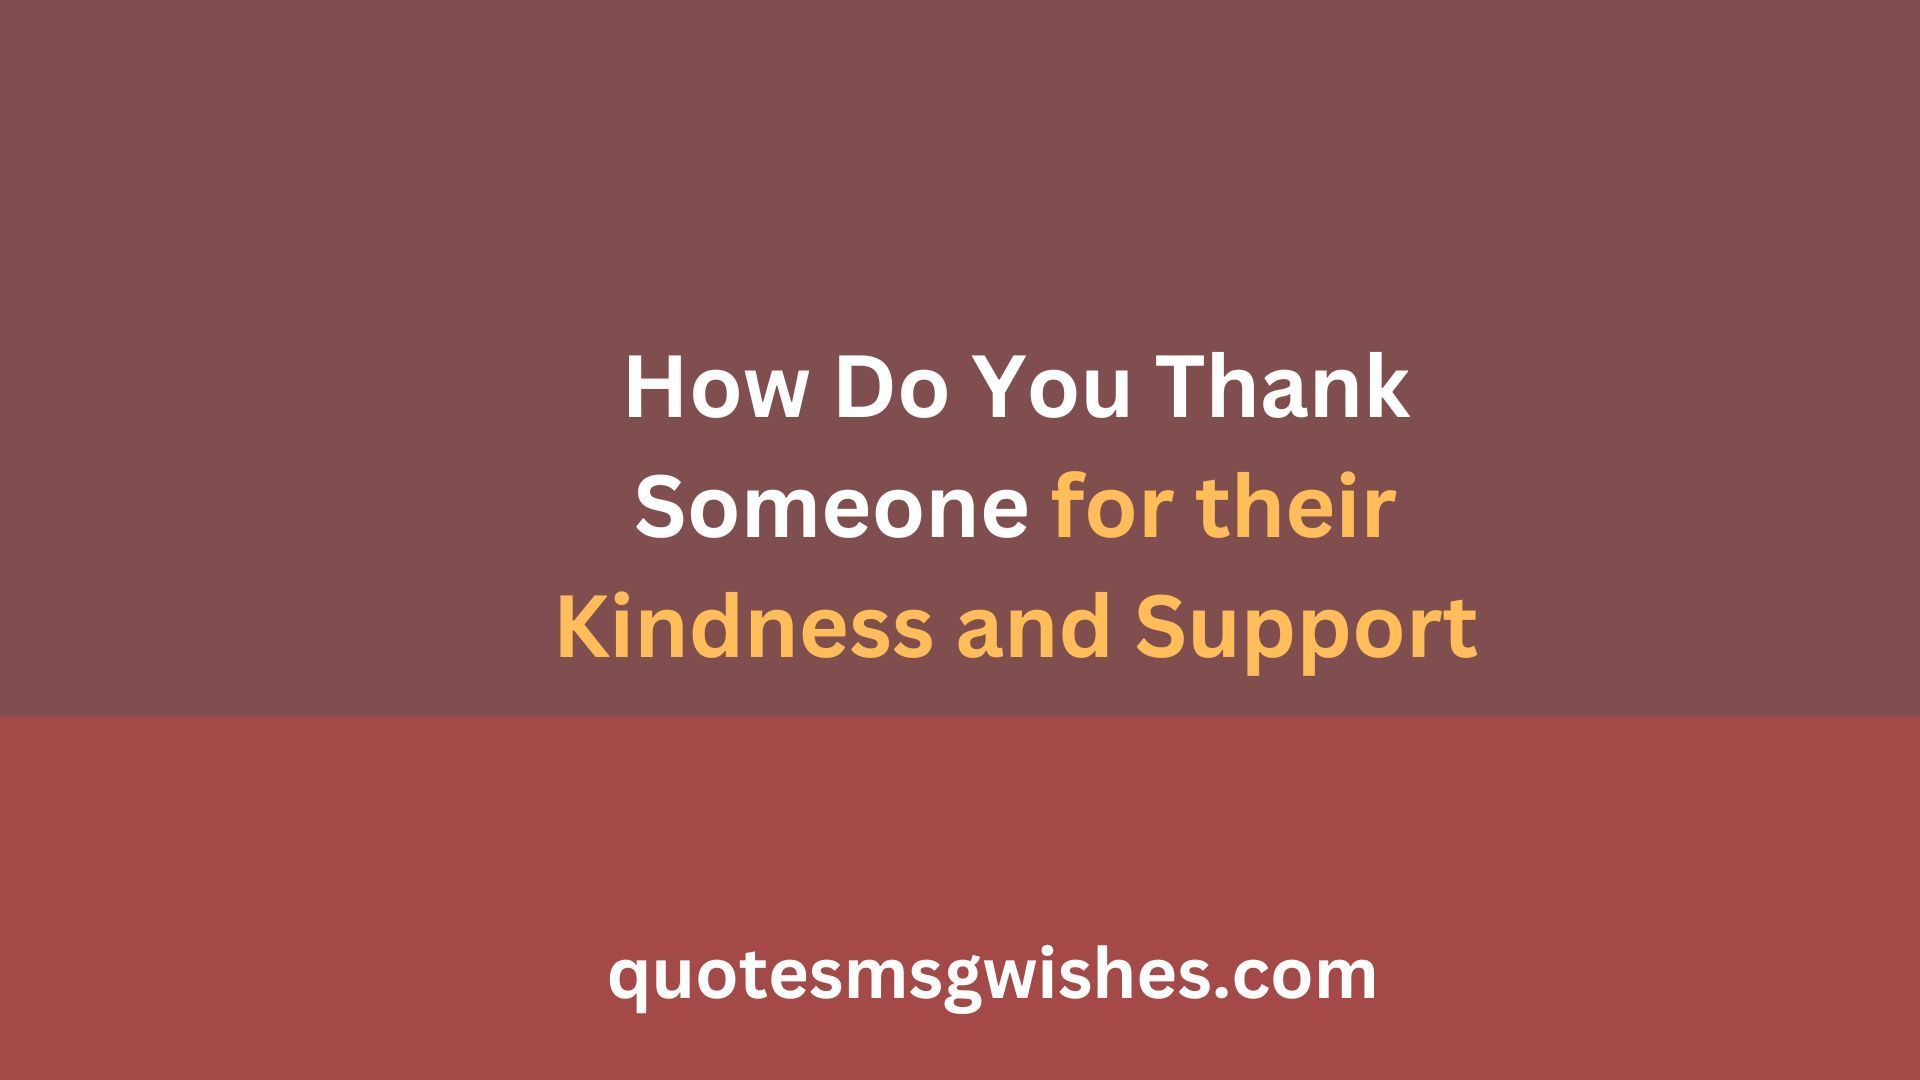 How Do You Thank someone for their Kindness and Support